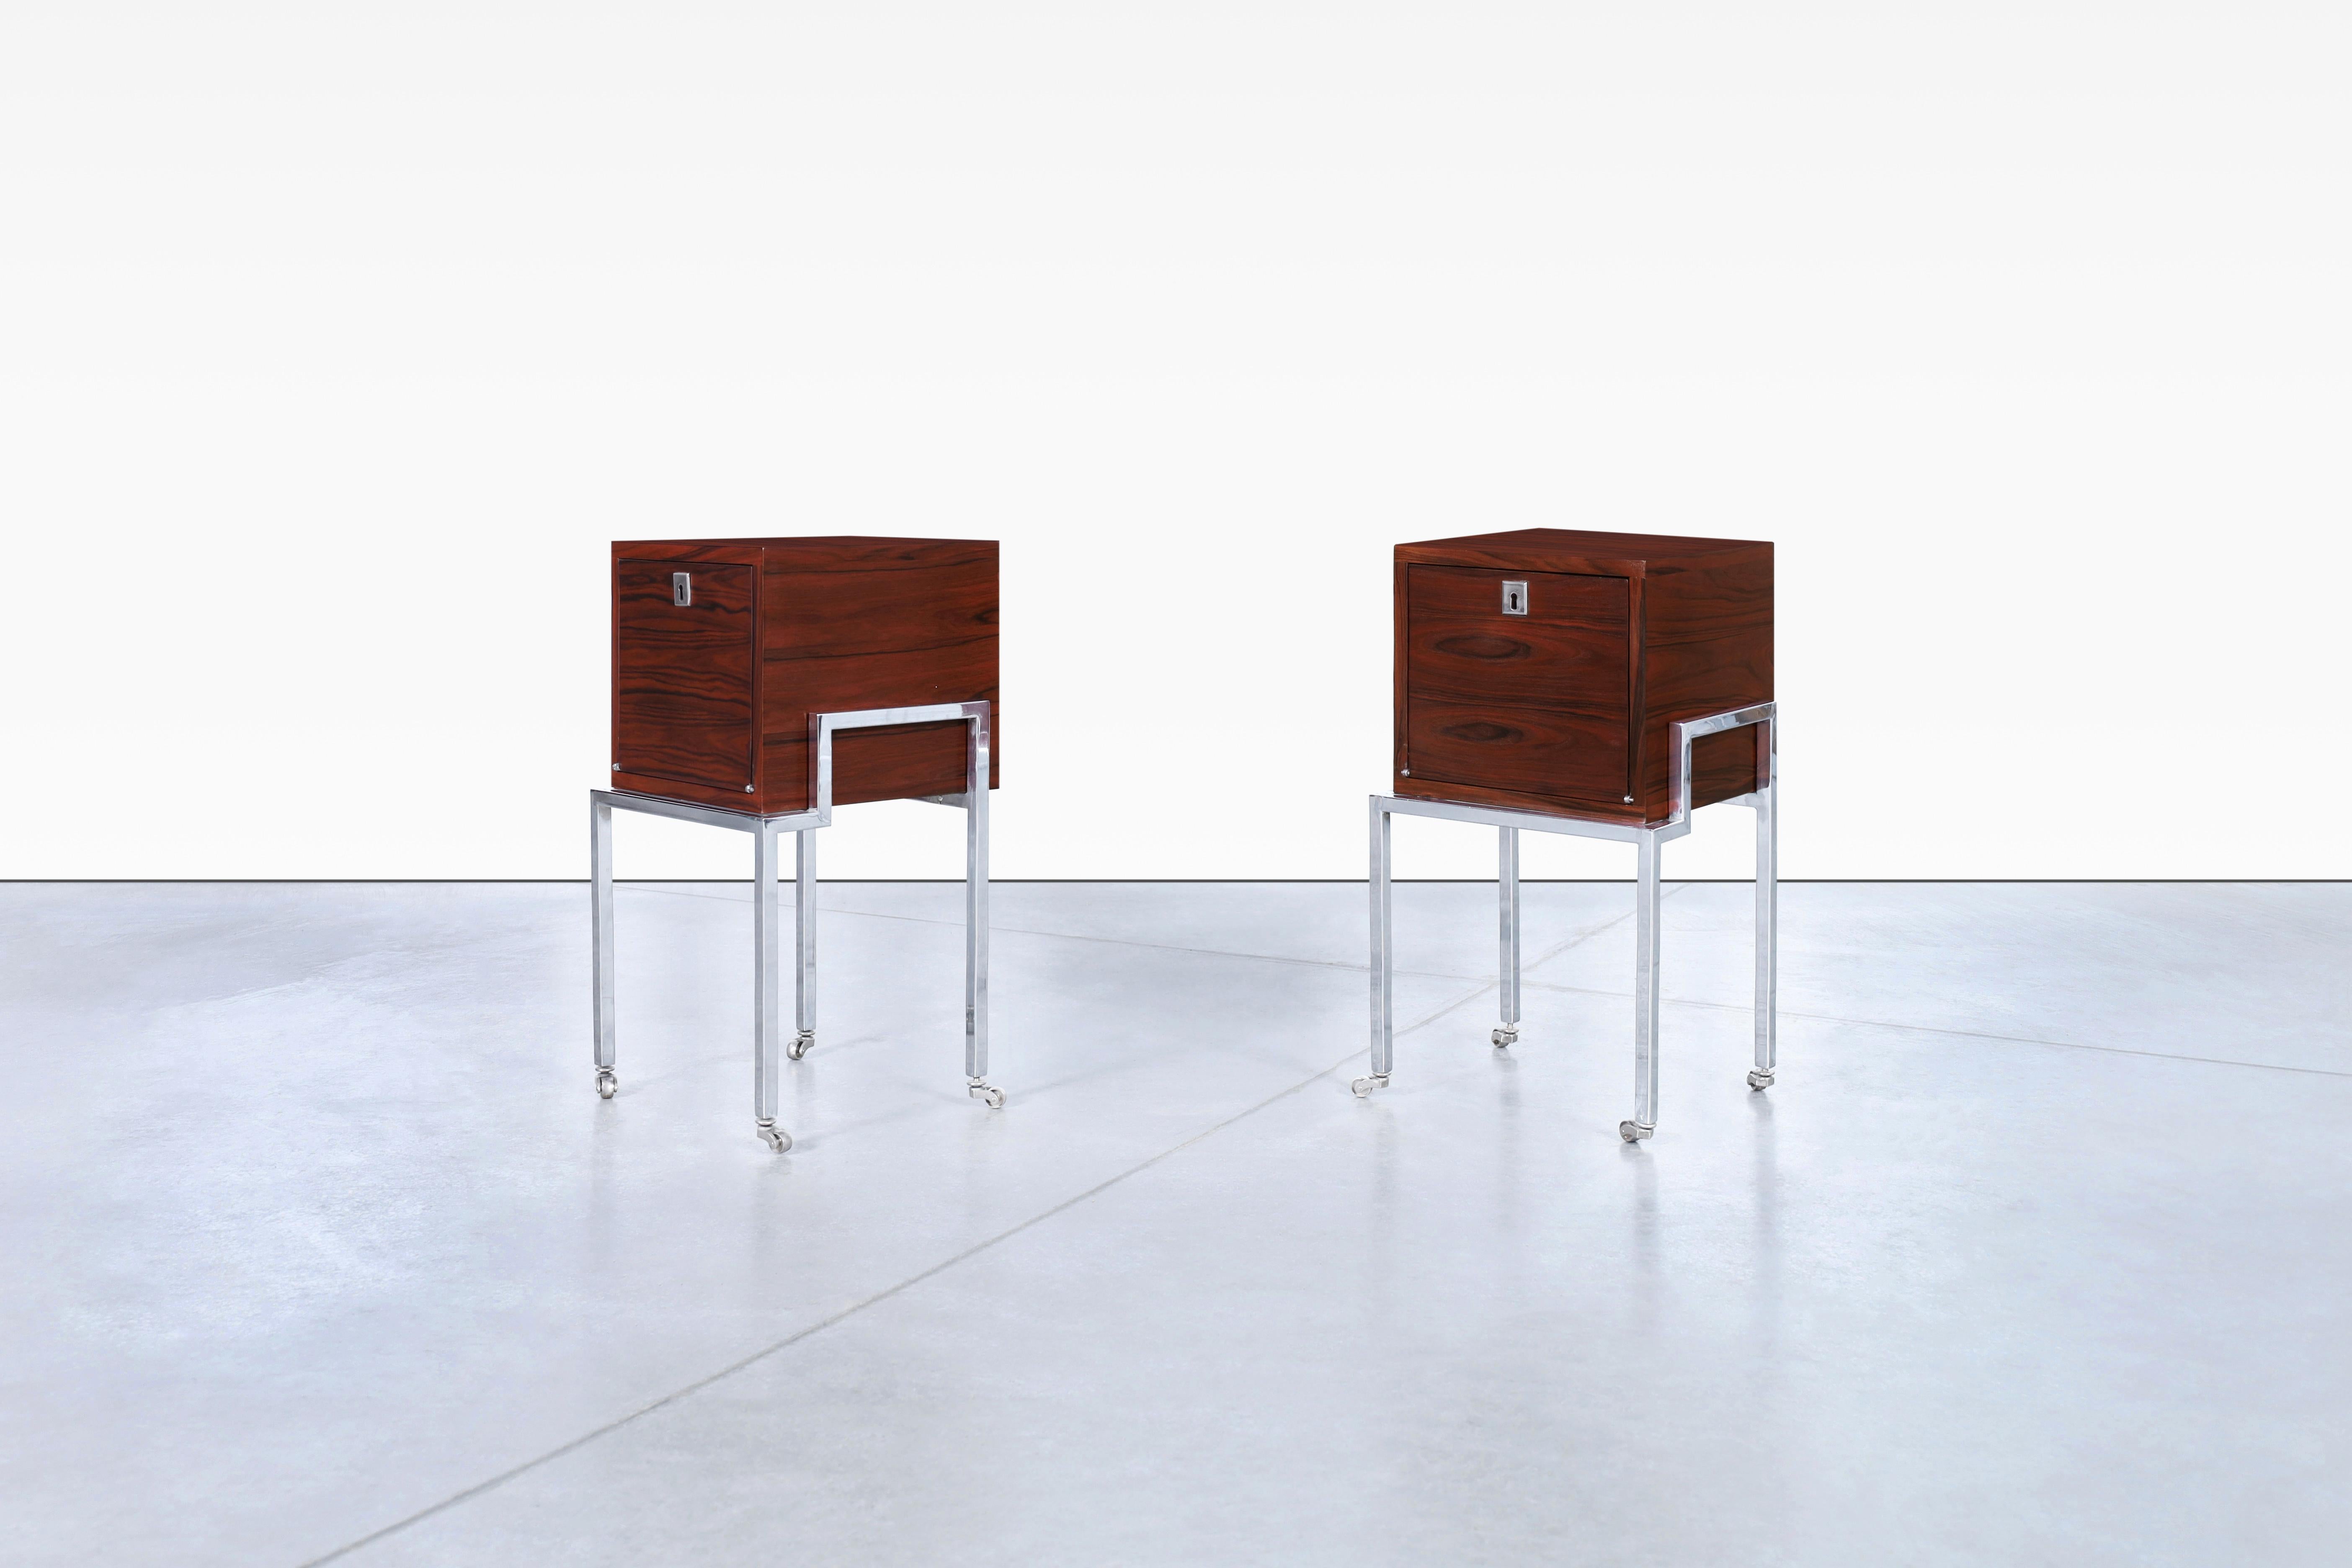 Vintage Colombian rosewood and chrome end tables/nightstands, designed by IMA S.A. in Colombia, circa 1980s. What makes these refinished nightstands truly exceptional is their versatility. With the addition of sturdy steel casters, these pieces can